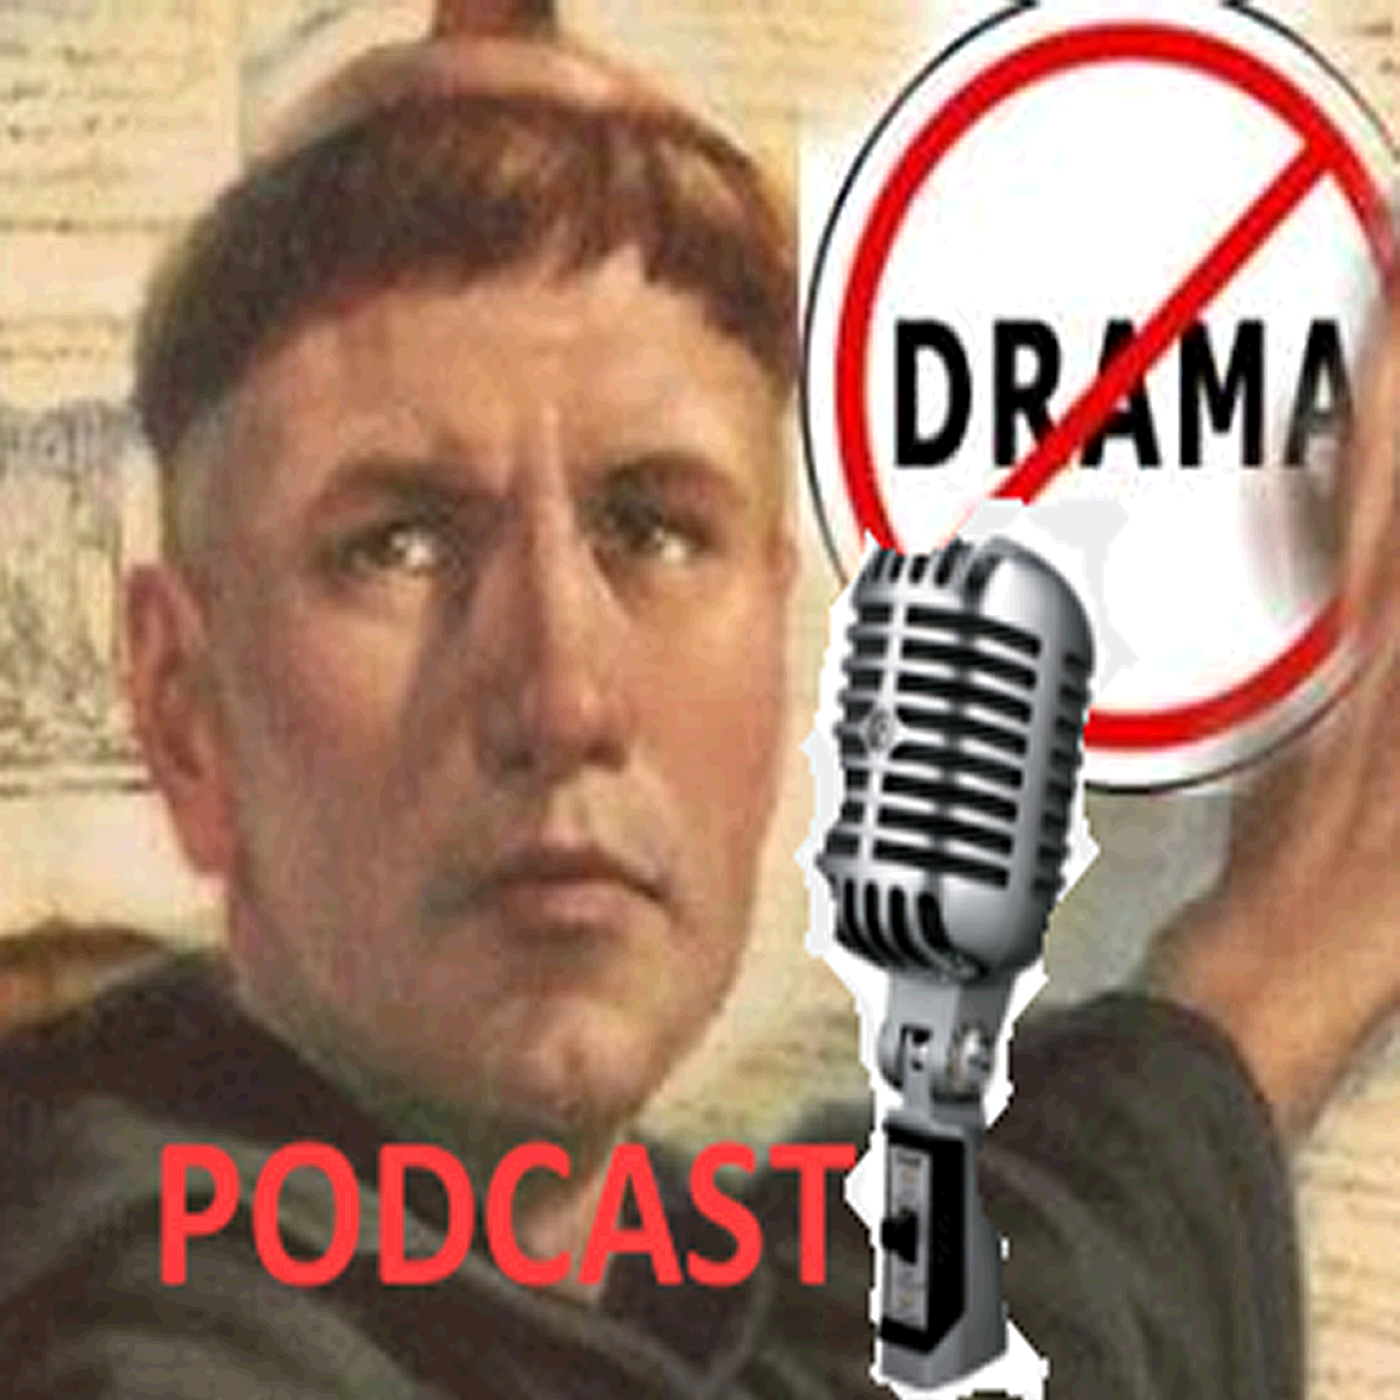 NO DRAMA Podcast - Episode 11: Romans 9 - Faith not works - No Double predestination - what's up with CoWo?